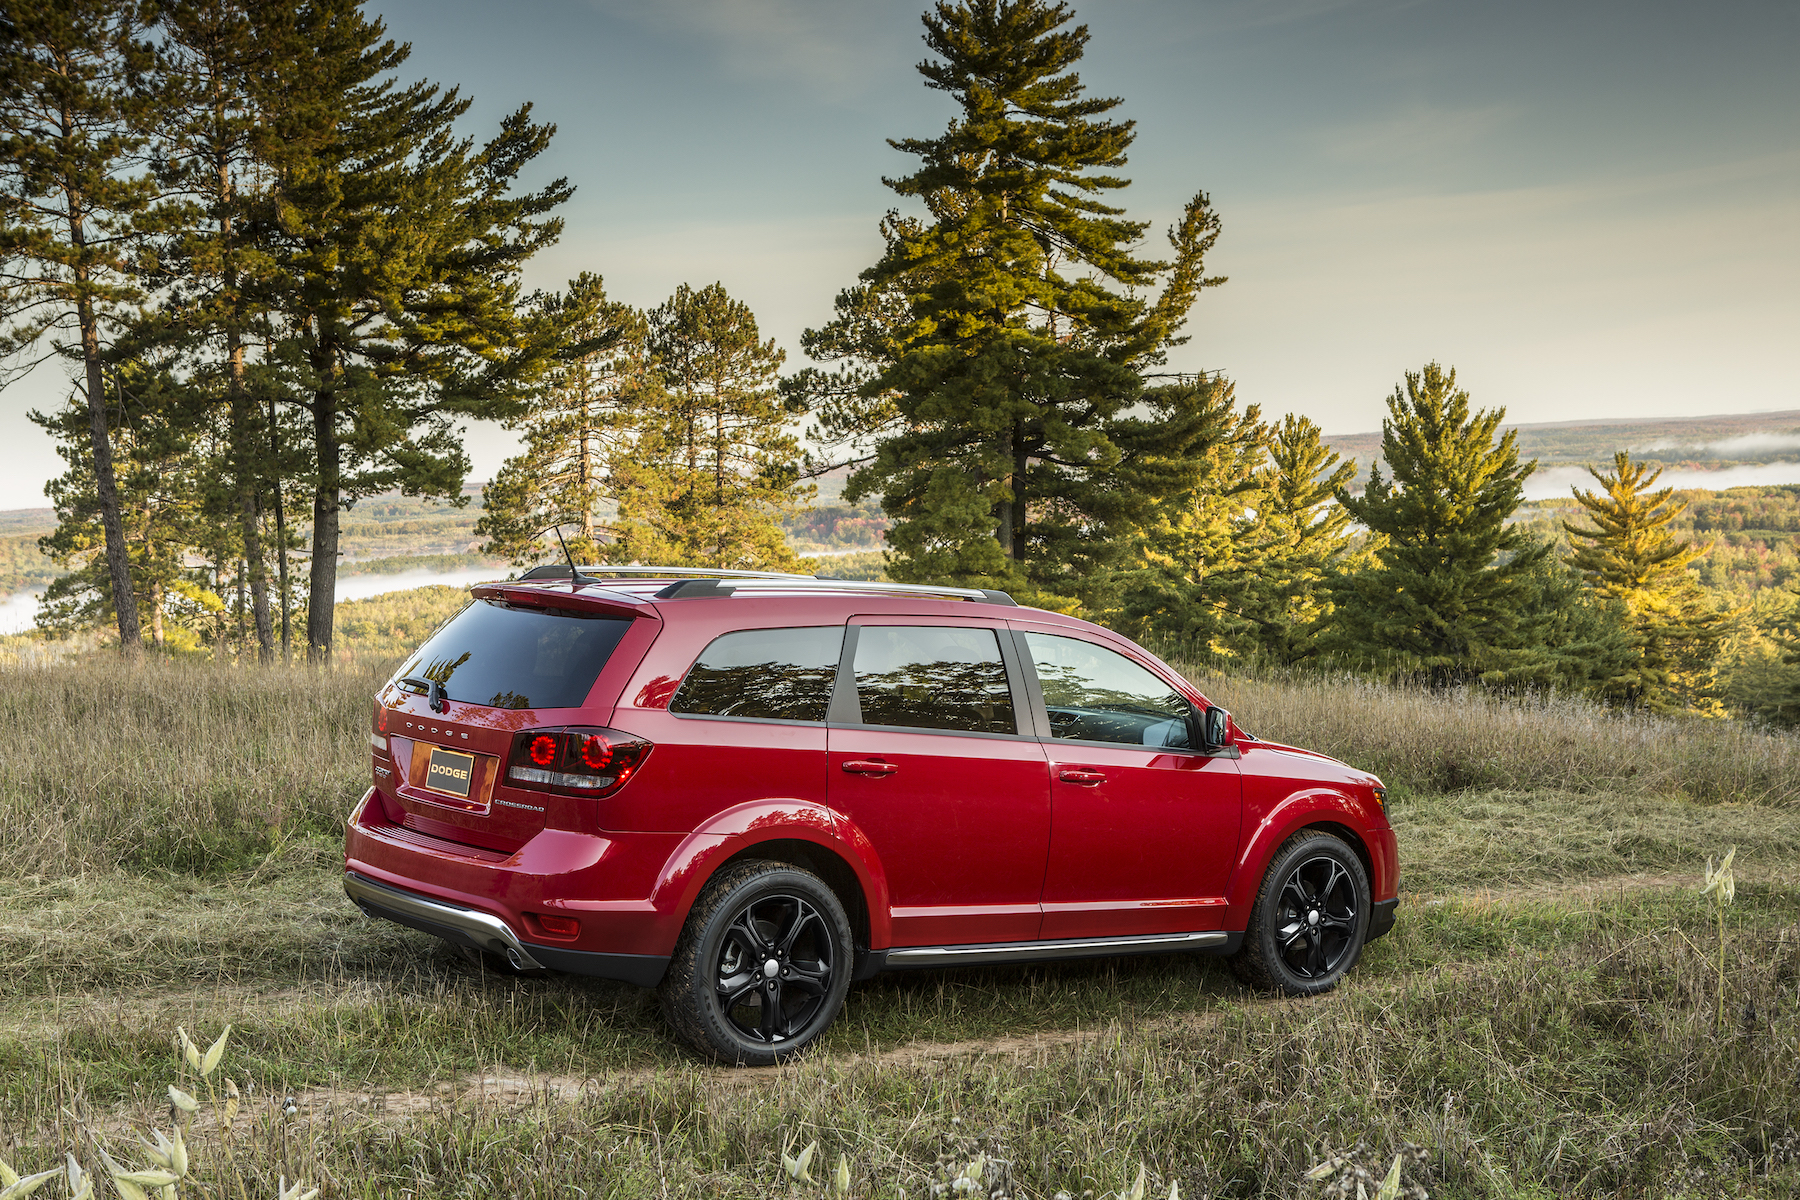 2018 Dodge Journey Review, Ratings, Specs, Prices, and Photos The Car